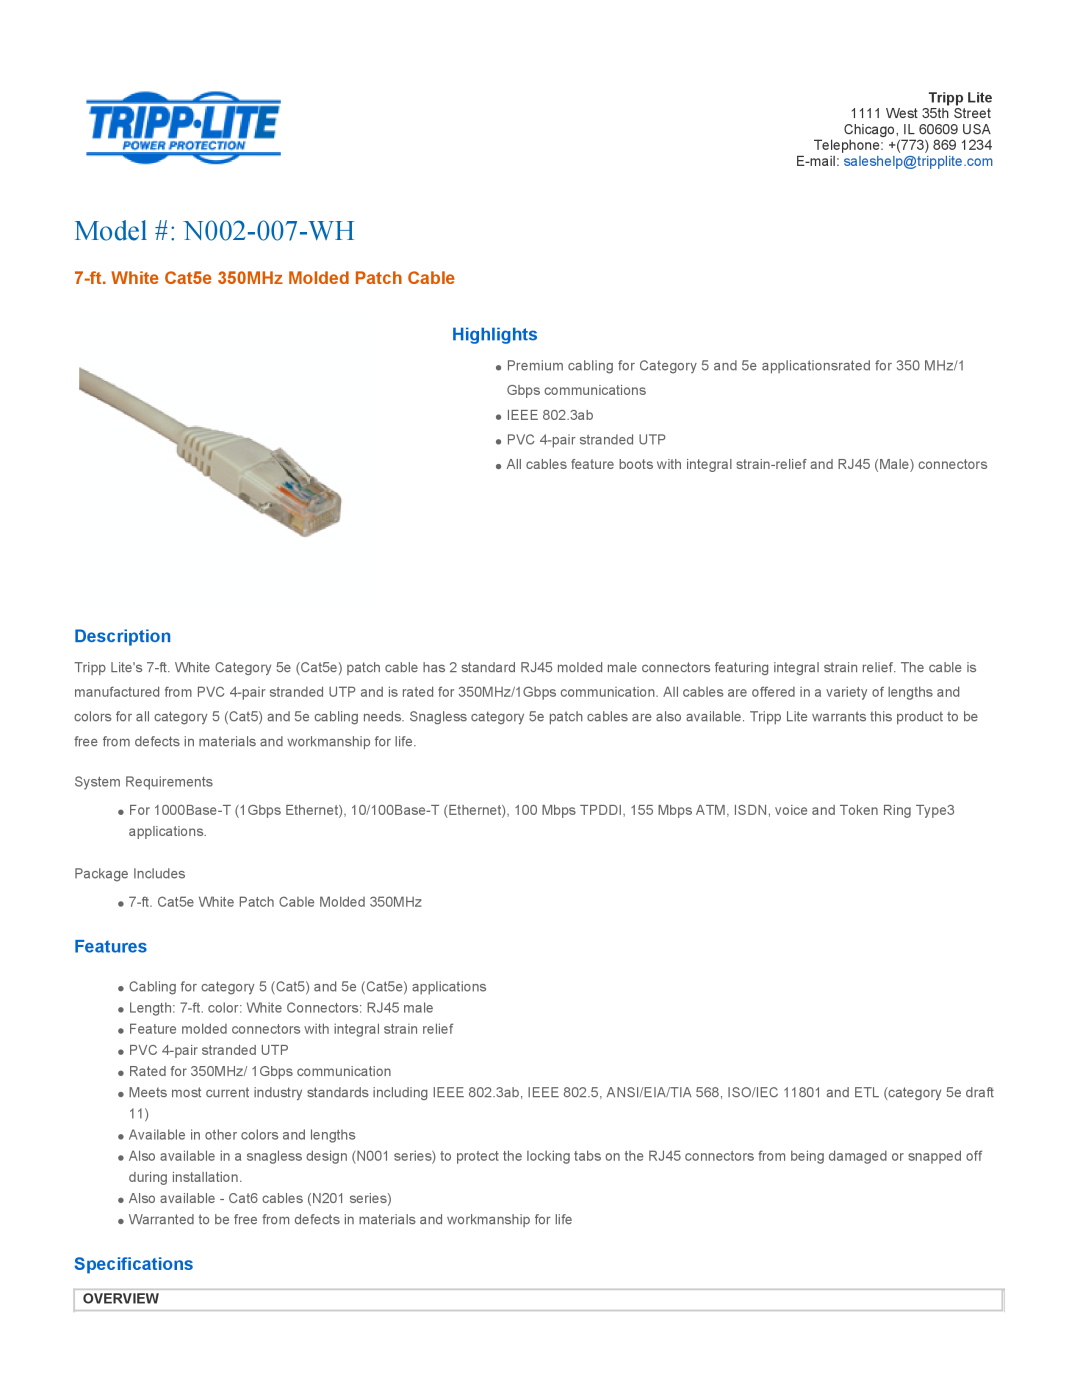 Tripp Lite specifications Overview, Model # N002-007-WH, 7-ft. White Cat5e 350MHz Molded Patch Cable, Highlights 